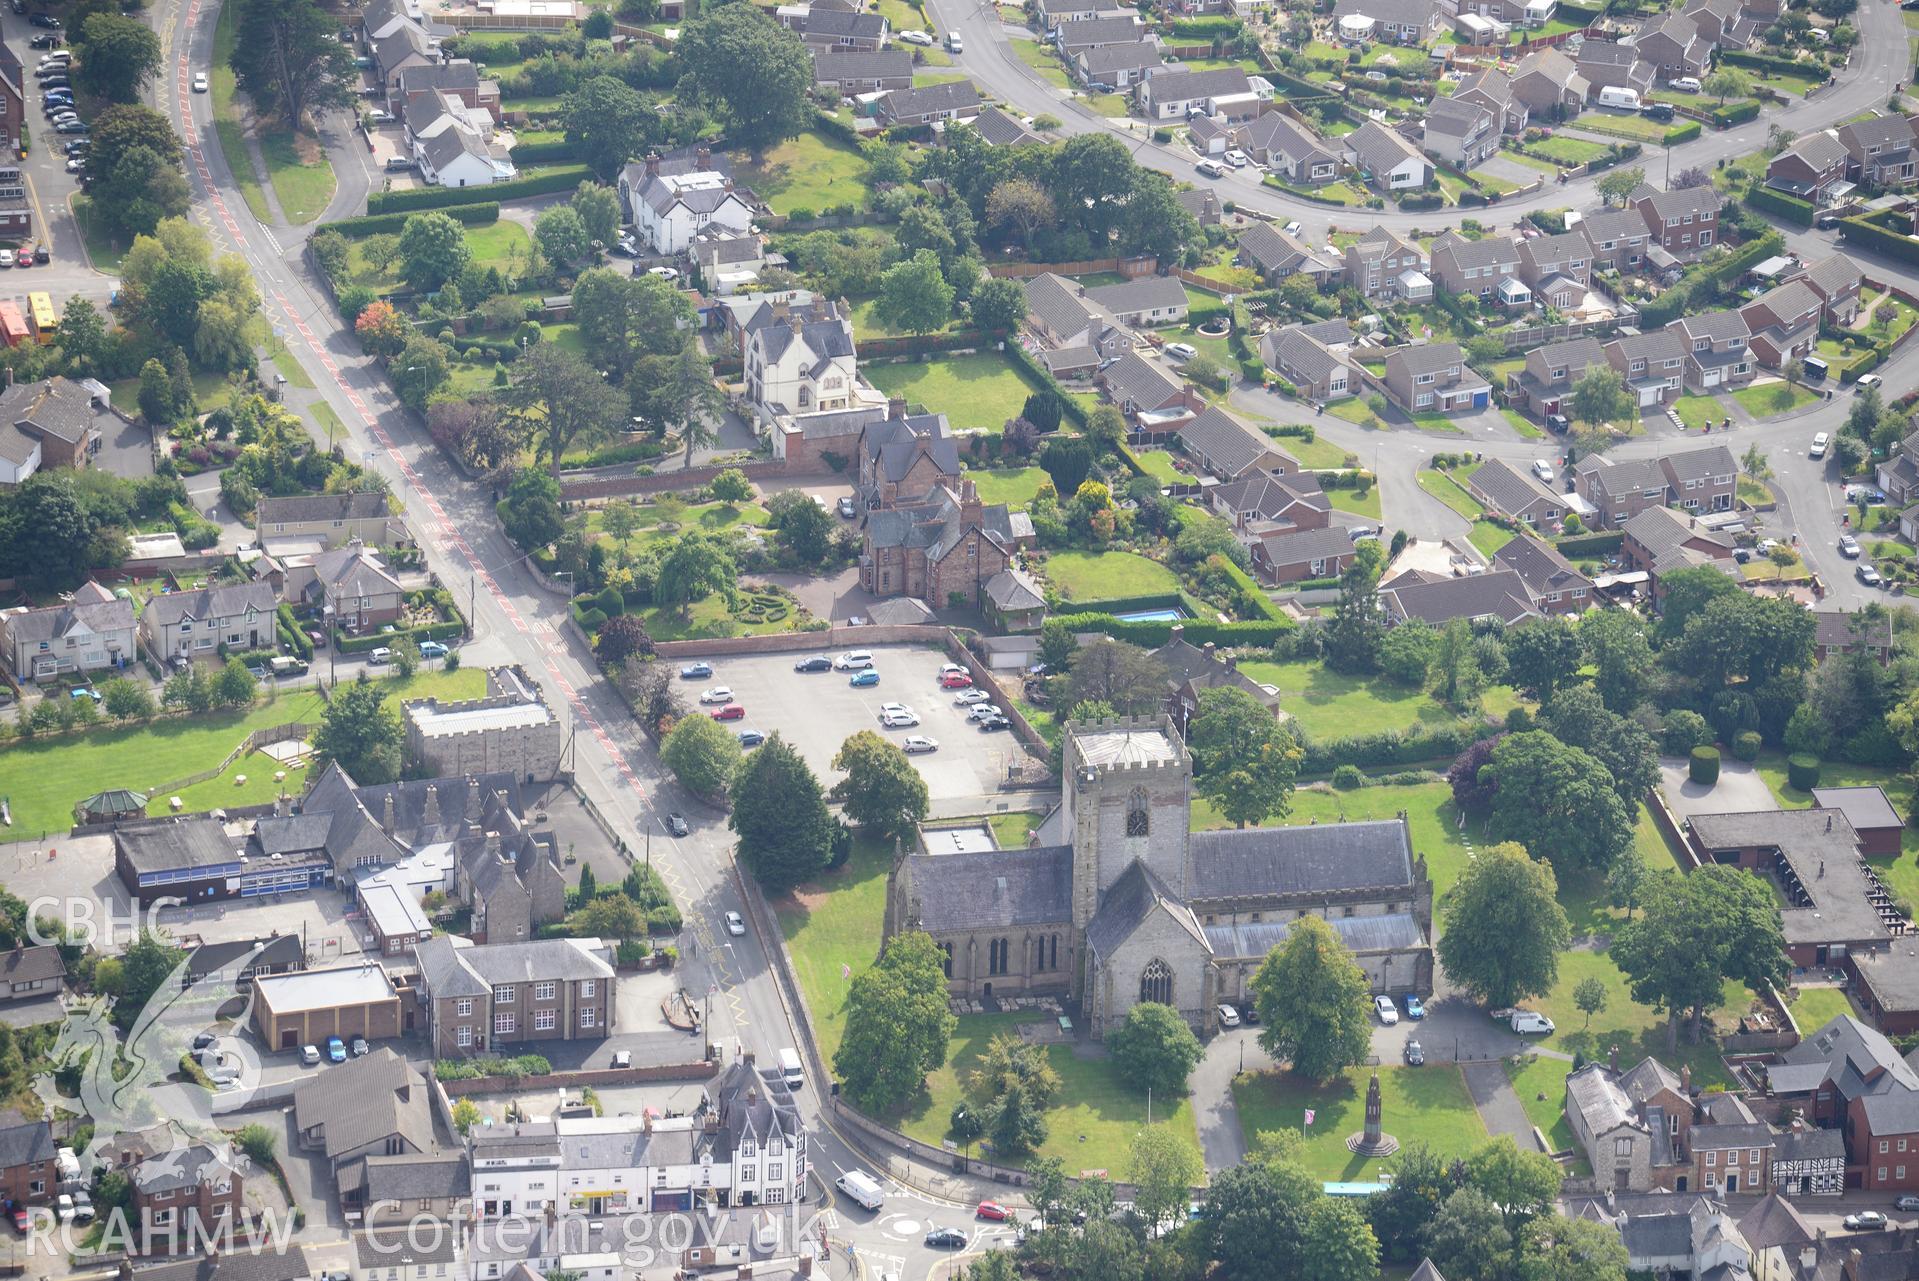 St. Asaph Cathedral and the Bishop William Morgan Memorial in the city of St. Asaph. Oblique aerial photograph taken during the Royal Commission's programme of archaeological aerial reconnaissance by Toby Driver on 11th September 2015.